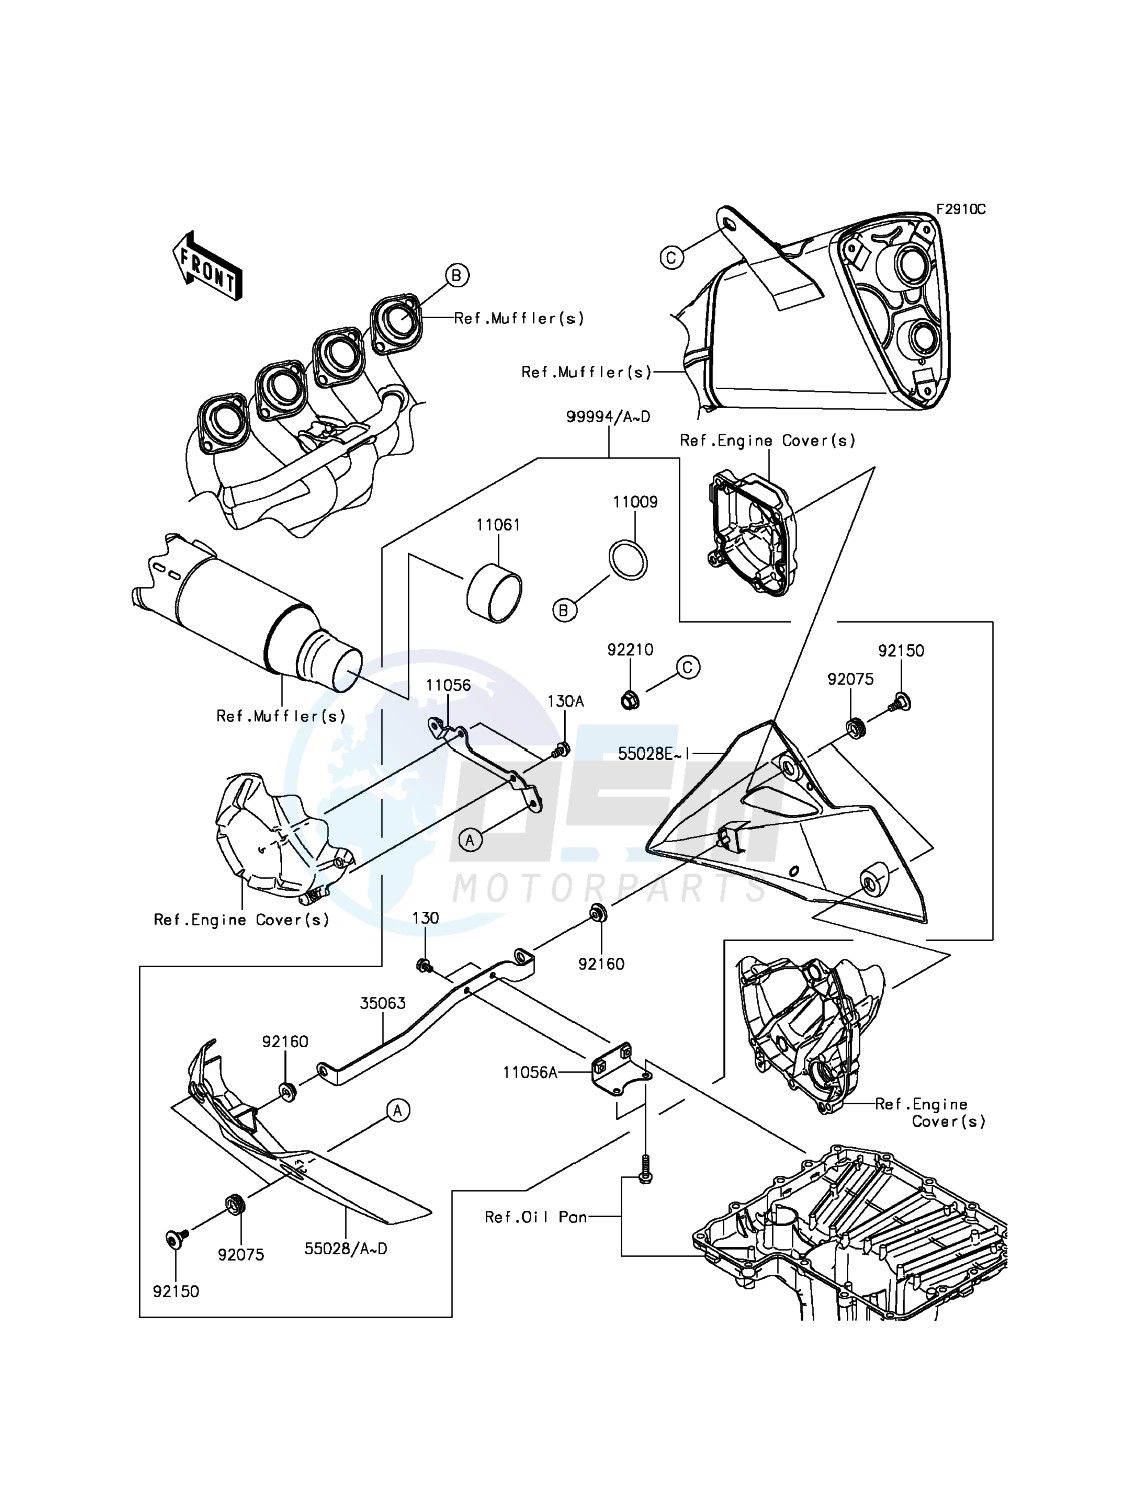 Accessory(Belly Pan) blueprint